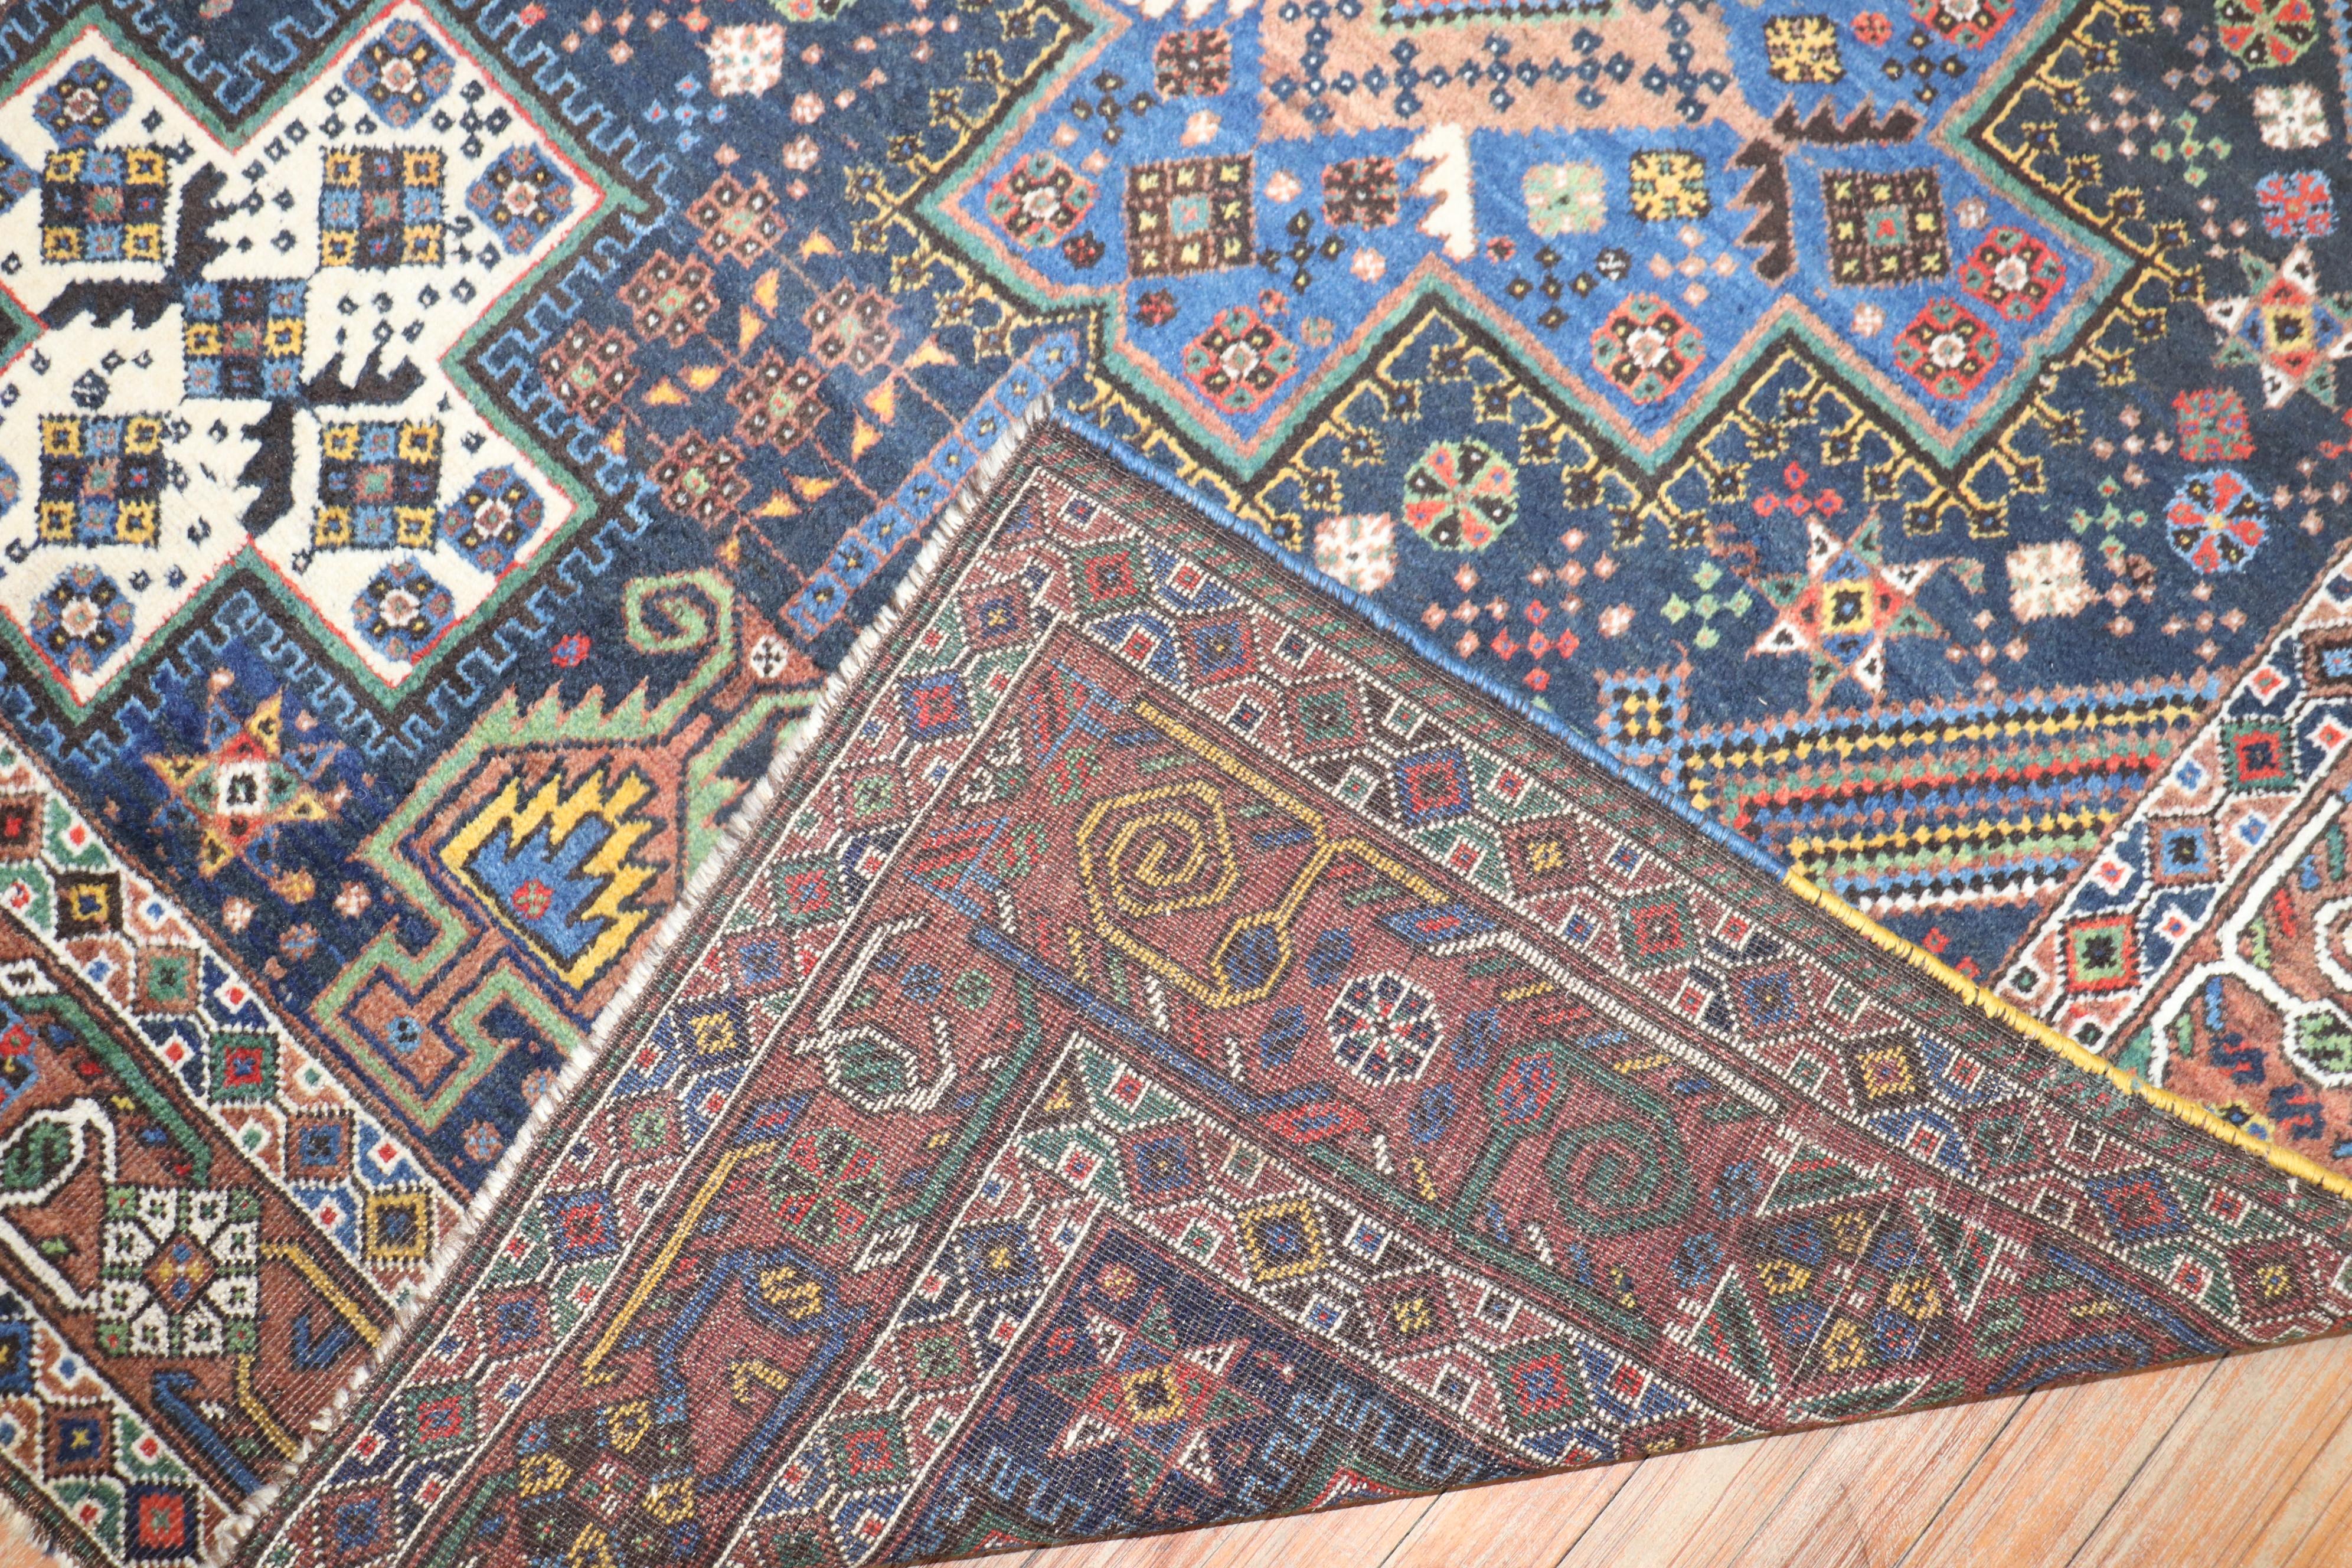 Vintage Northwest Persian square acccent size rug from the middle of the 20th Century

Measures: 5'2